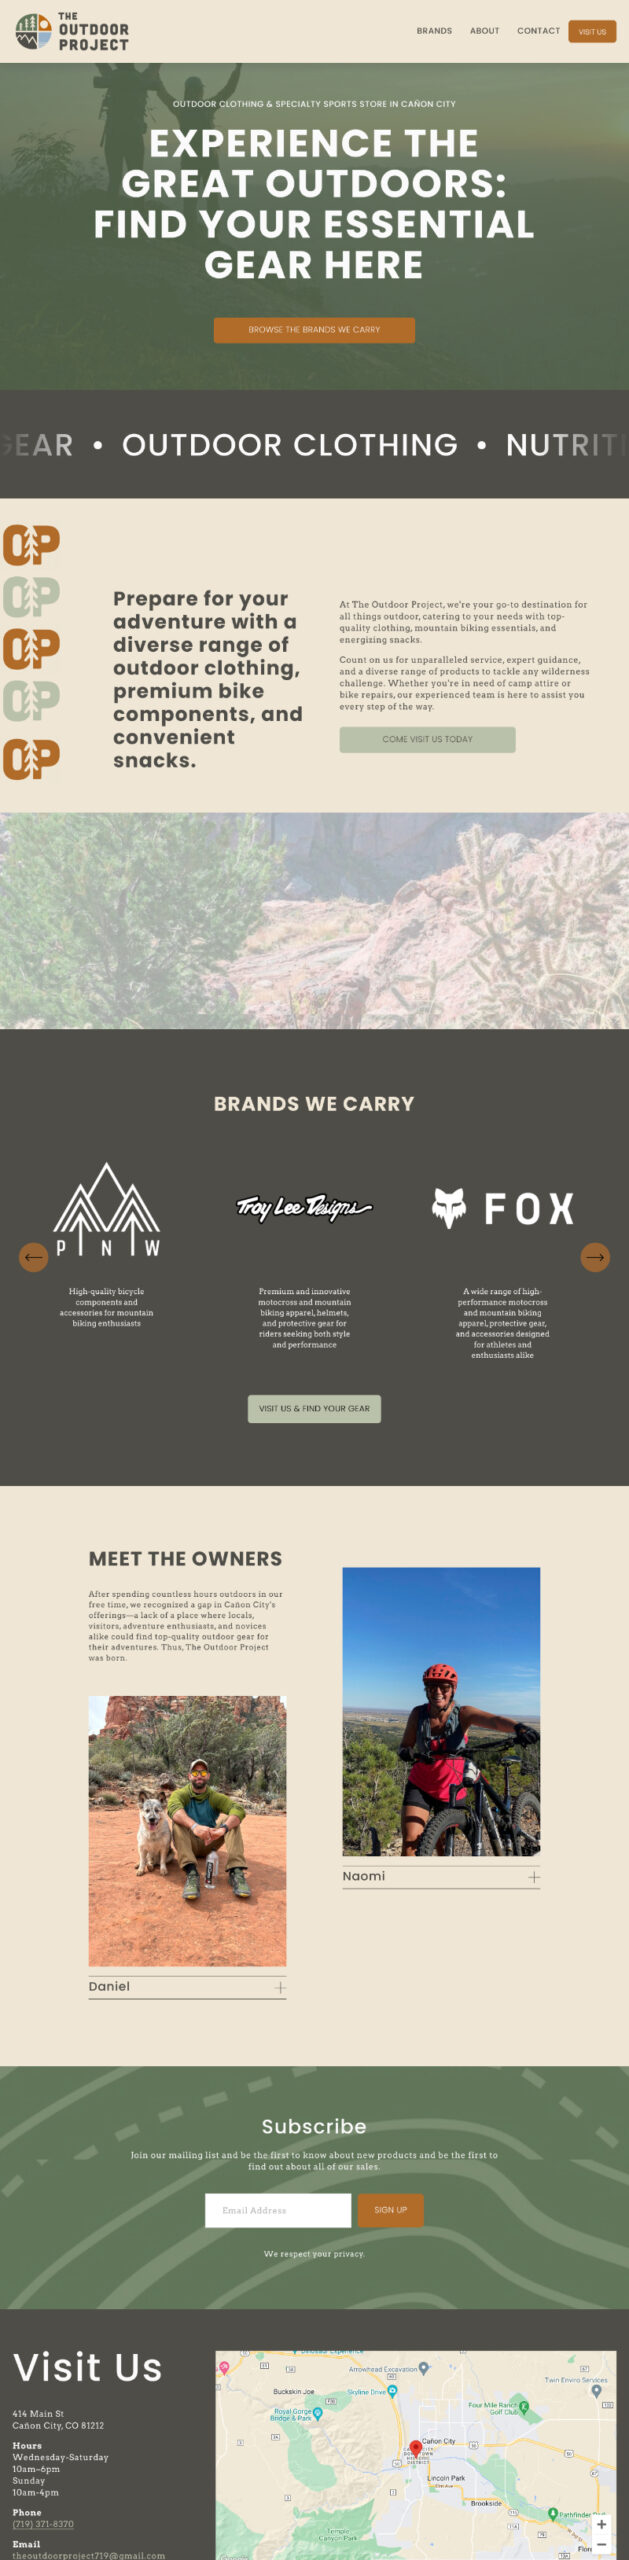 BRAND AND WEBSITE DESIGNER SHARES A NEW CLIENT EXPERIENCE OF NEW BRAND IDENTITY FOR A RETAIL STORE IN COLORADO